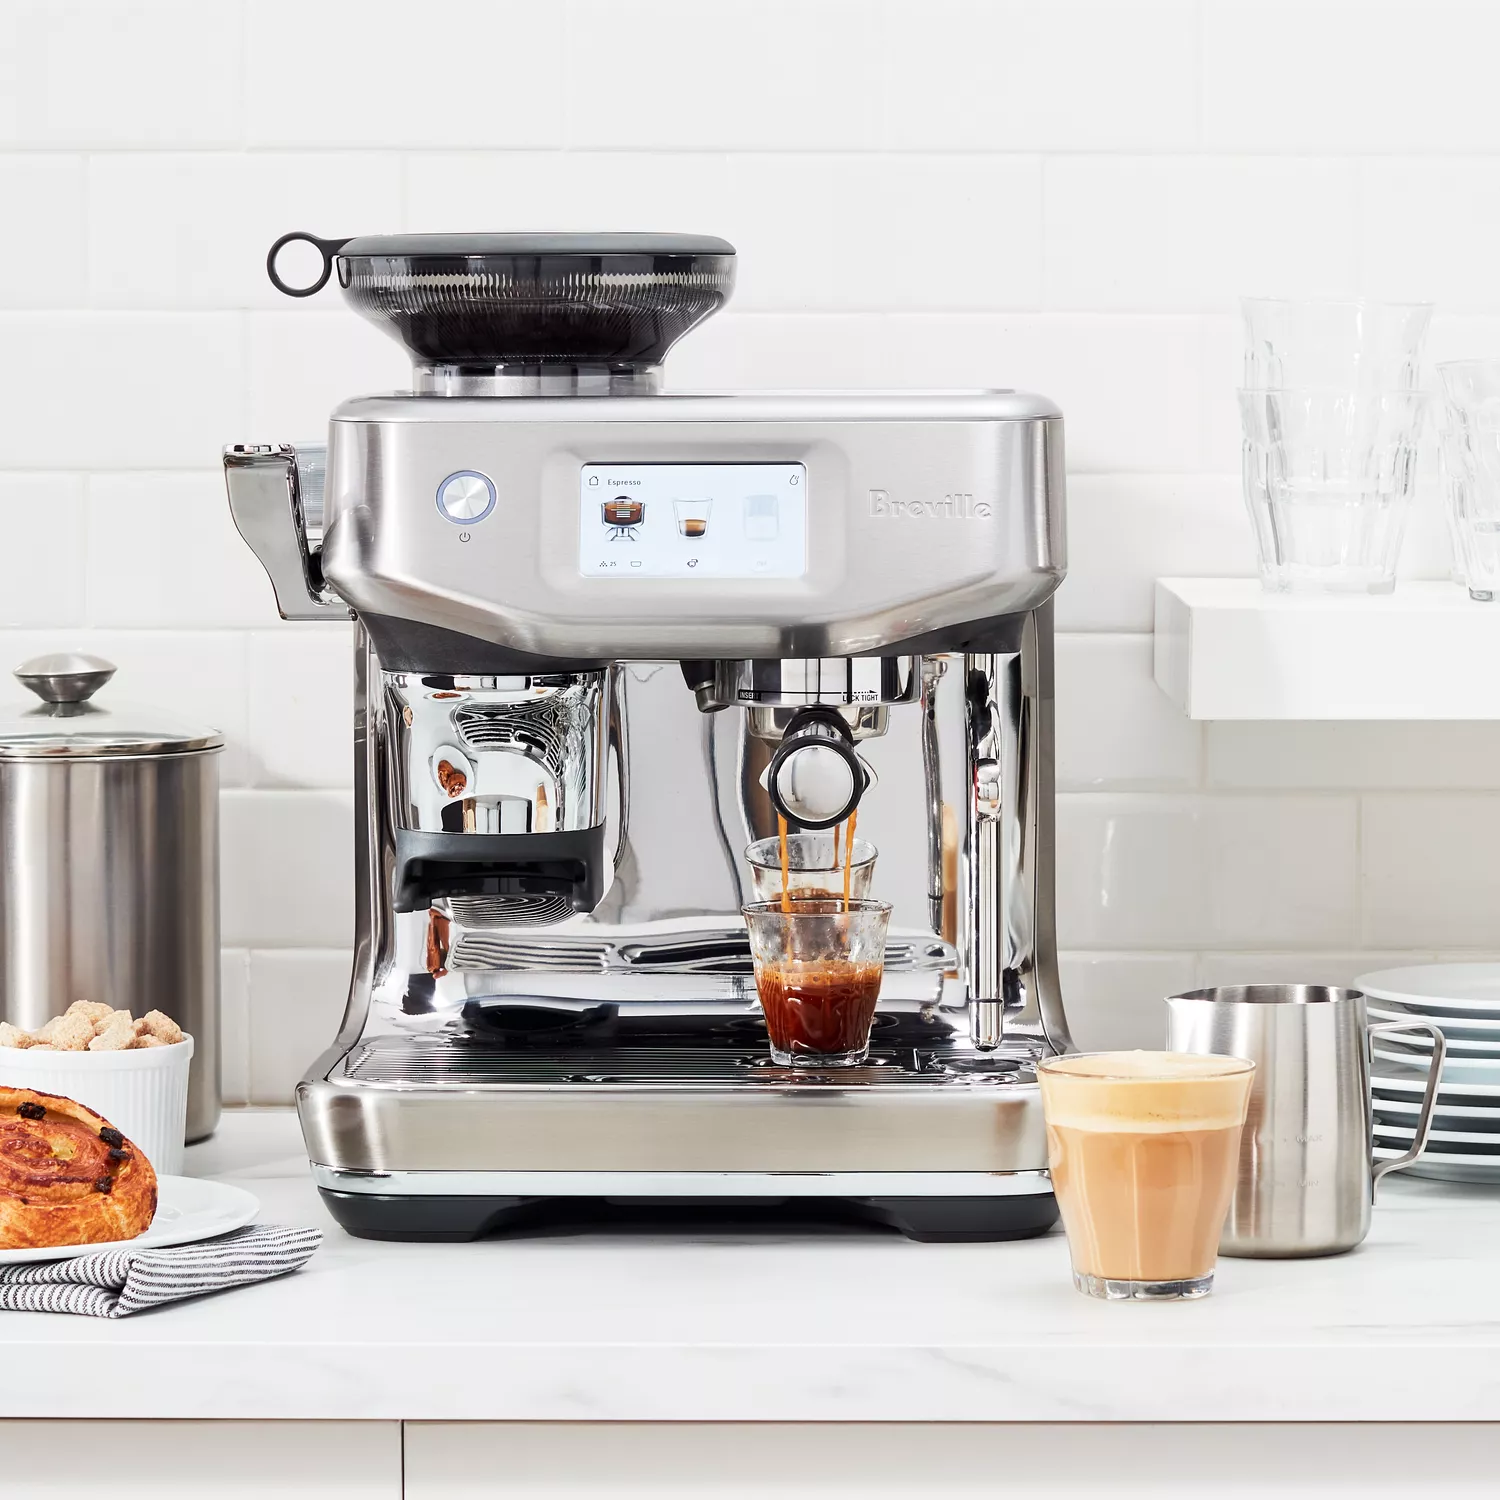 Breville's Touch Impress Espresso Machine makes cafe quality